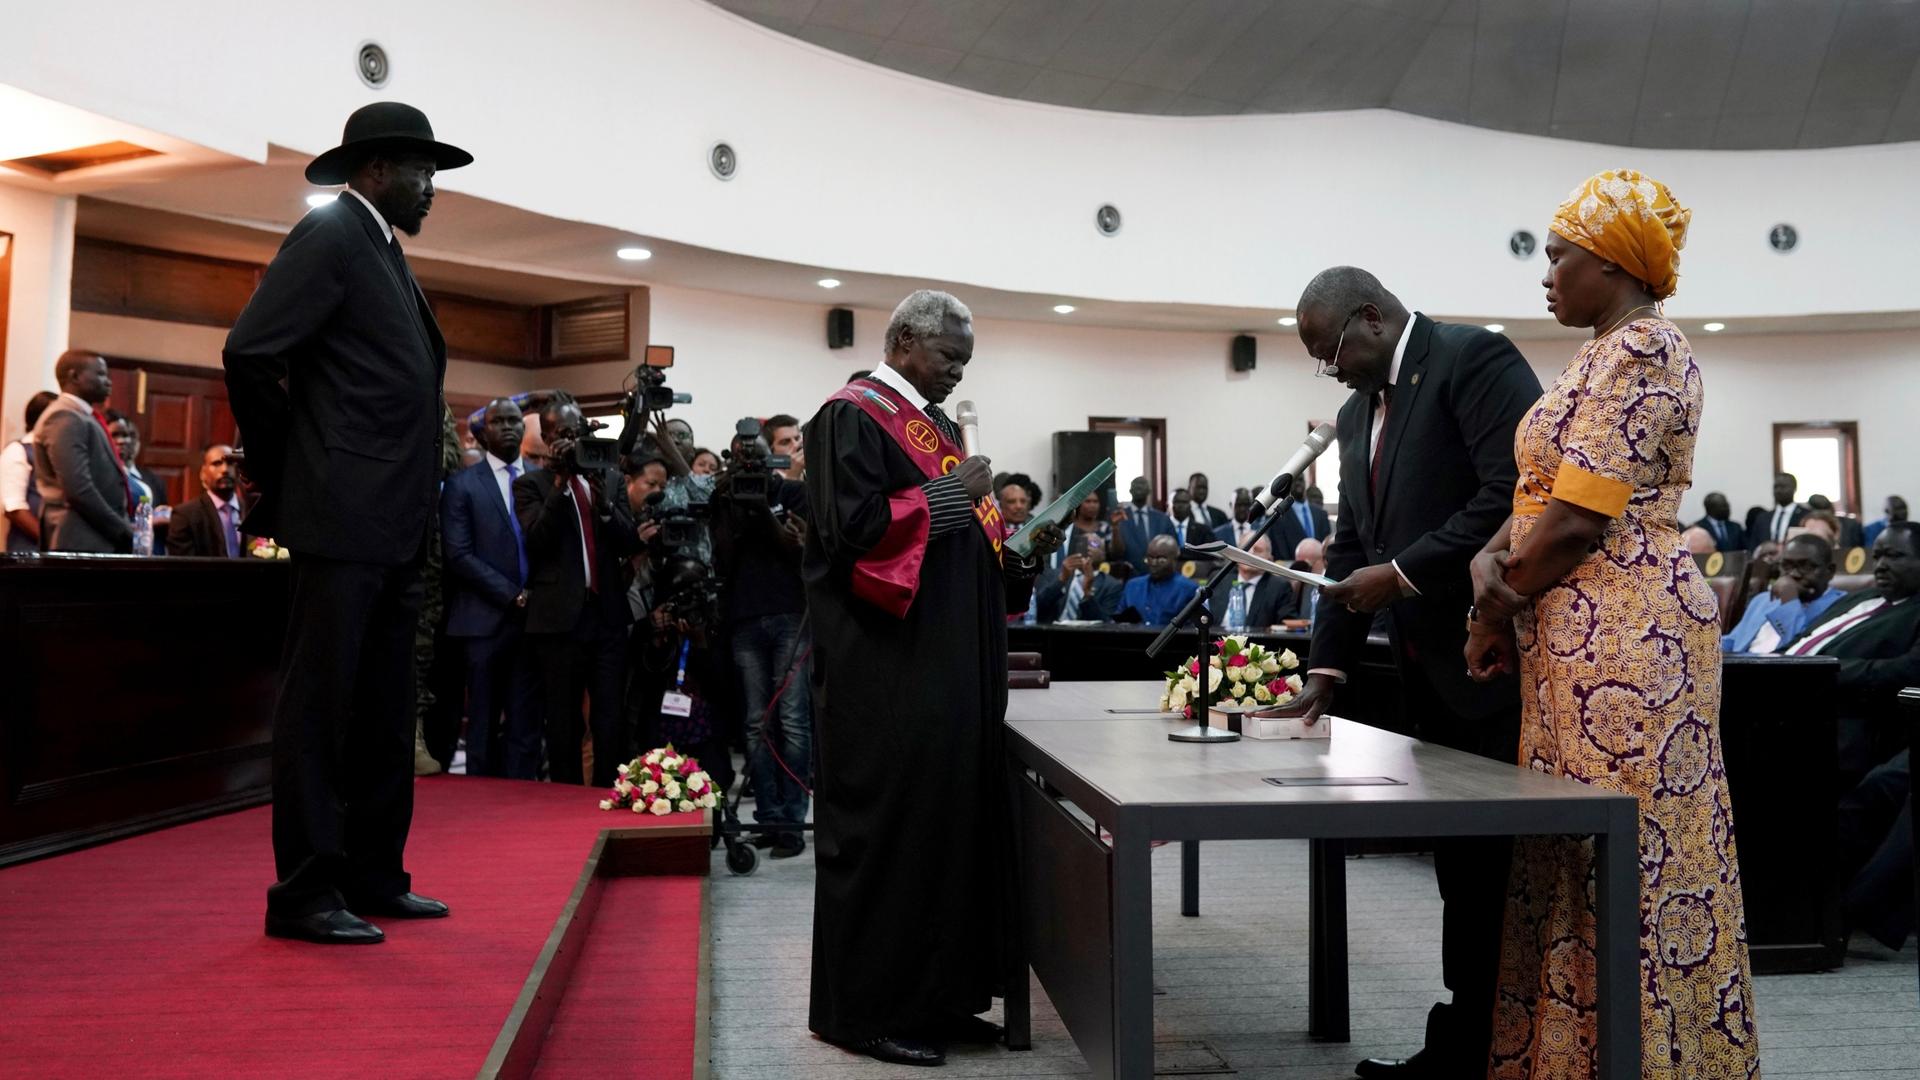 South Sudan's First Vice President Riek Machar takes the oath of office in front of President Salva Kiir and Chief Justice Chan Reech Madut at the State House in Juba, South Sudan, Feb. 22, 2020. 